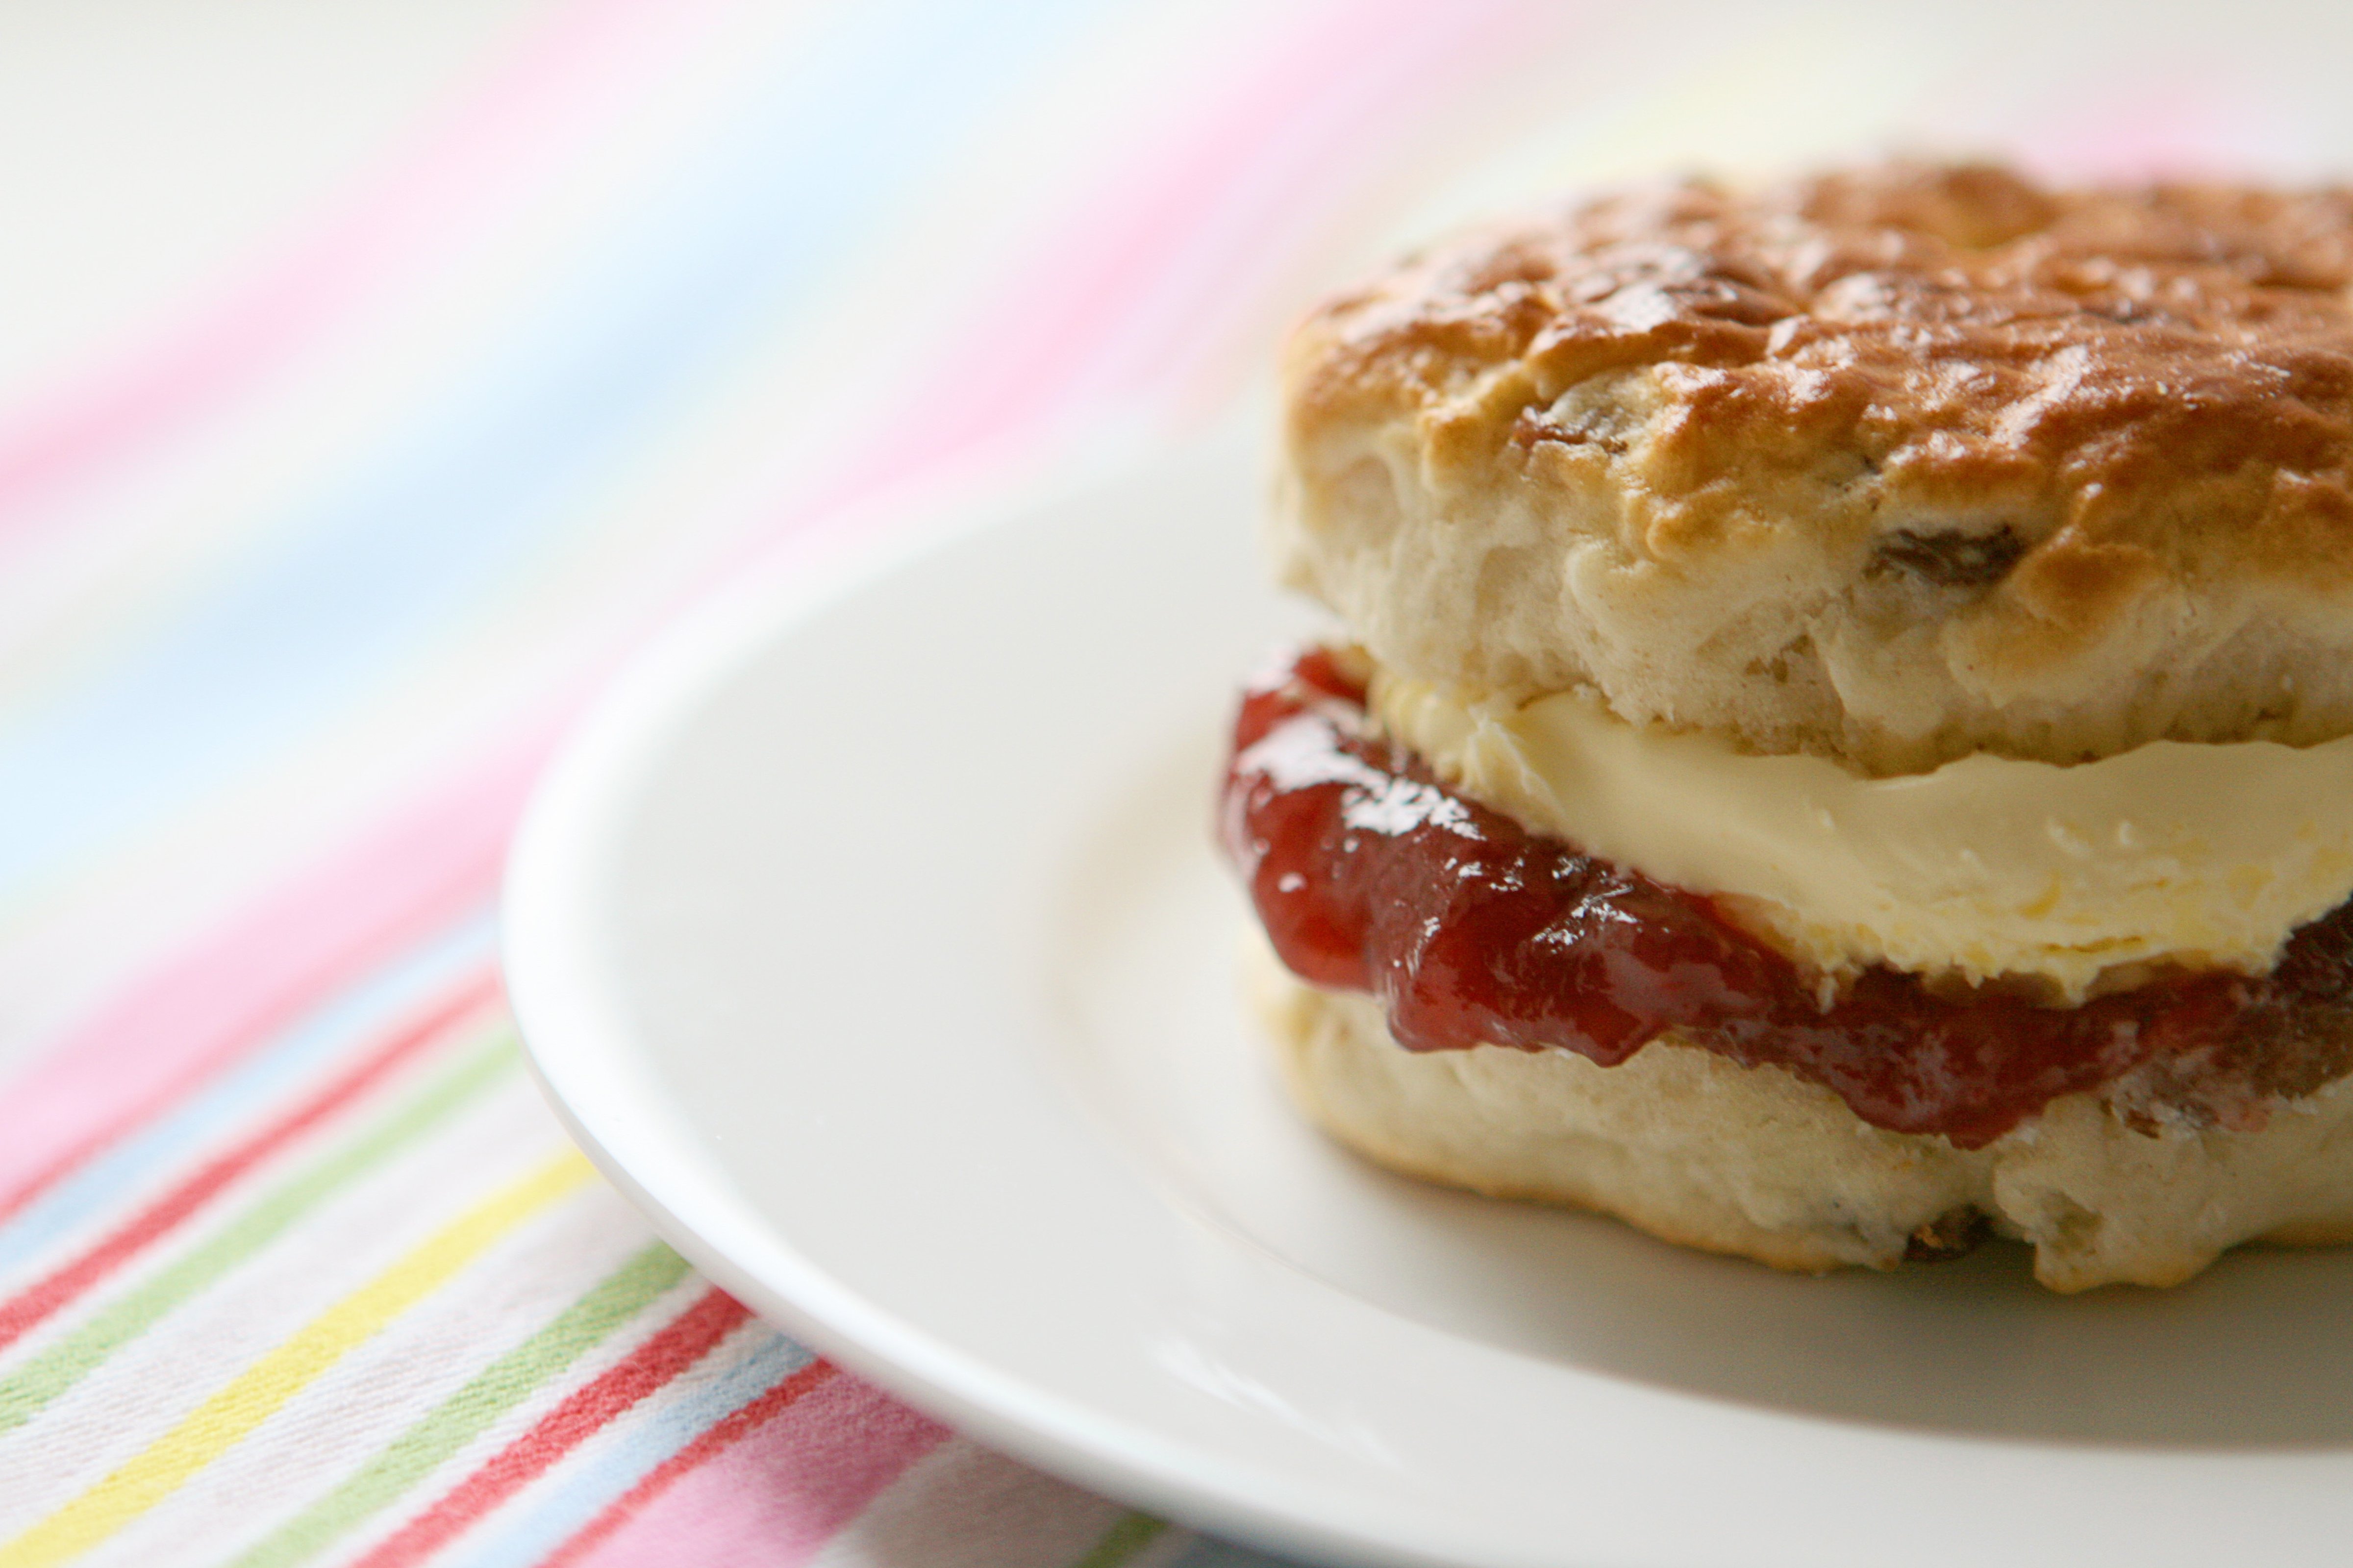 Scone with jam and clotted cream - often known as an English cream tea. (Jill Tindall&mdash;Getty Images)